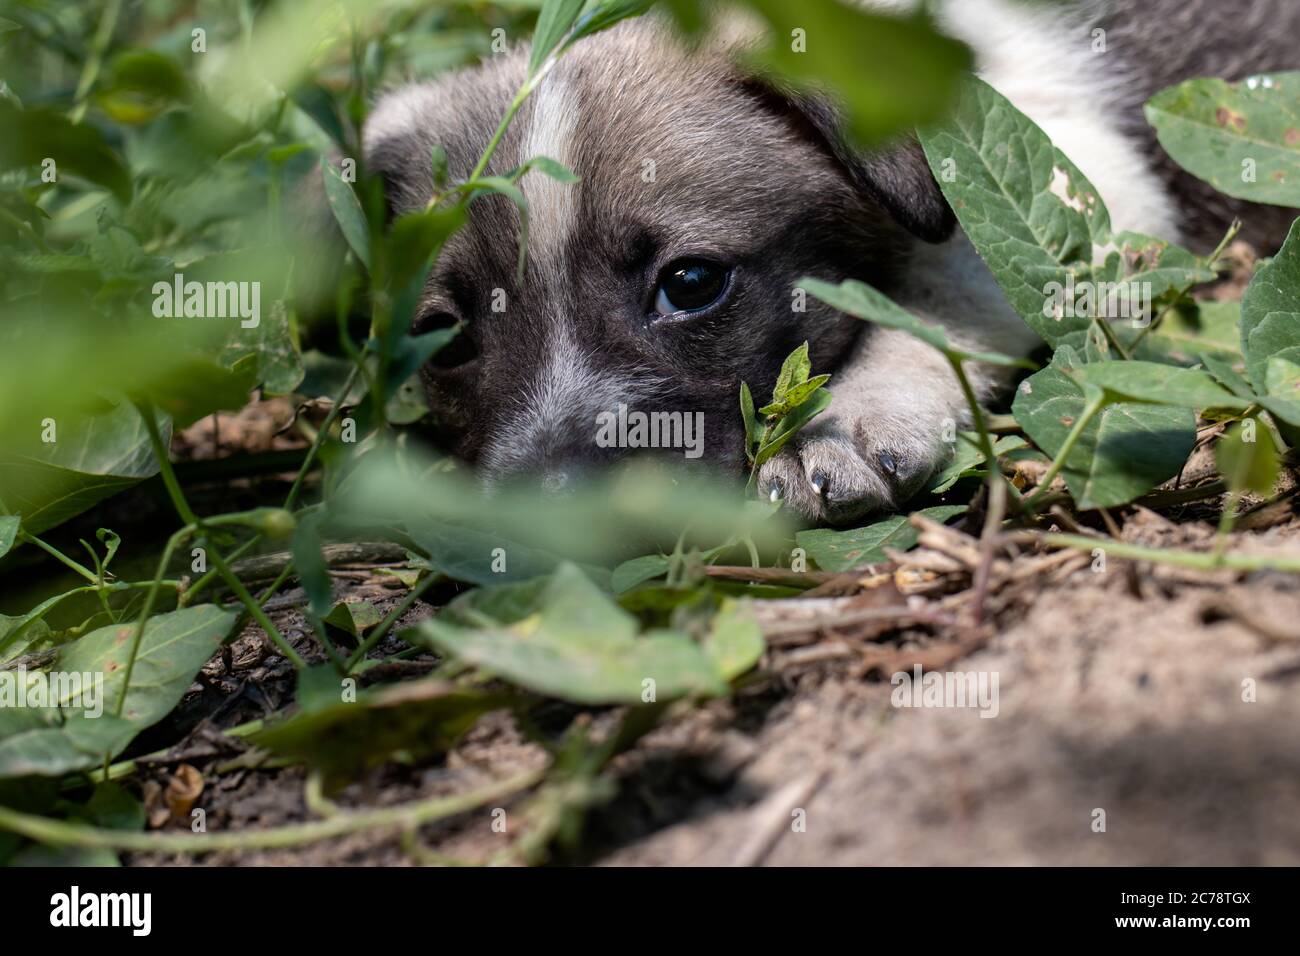 The little dog sits on the ground in the thick green grass and looks carefully with smart eyes. Poochie Pet Cute Beautiful Very Little Stock Photo